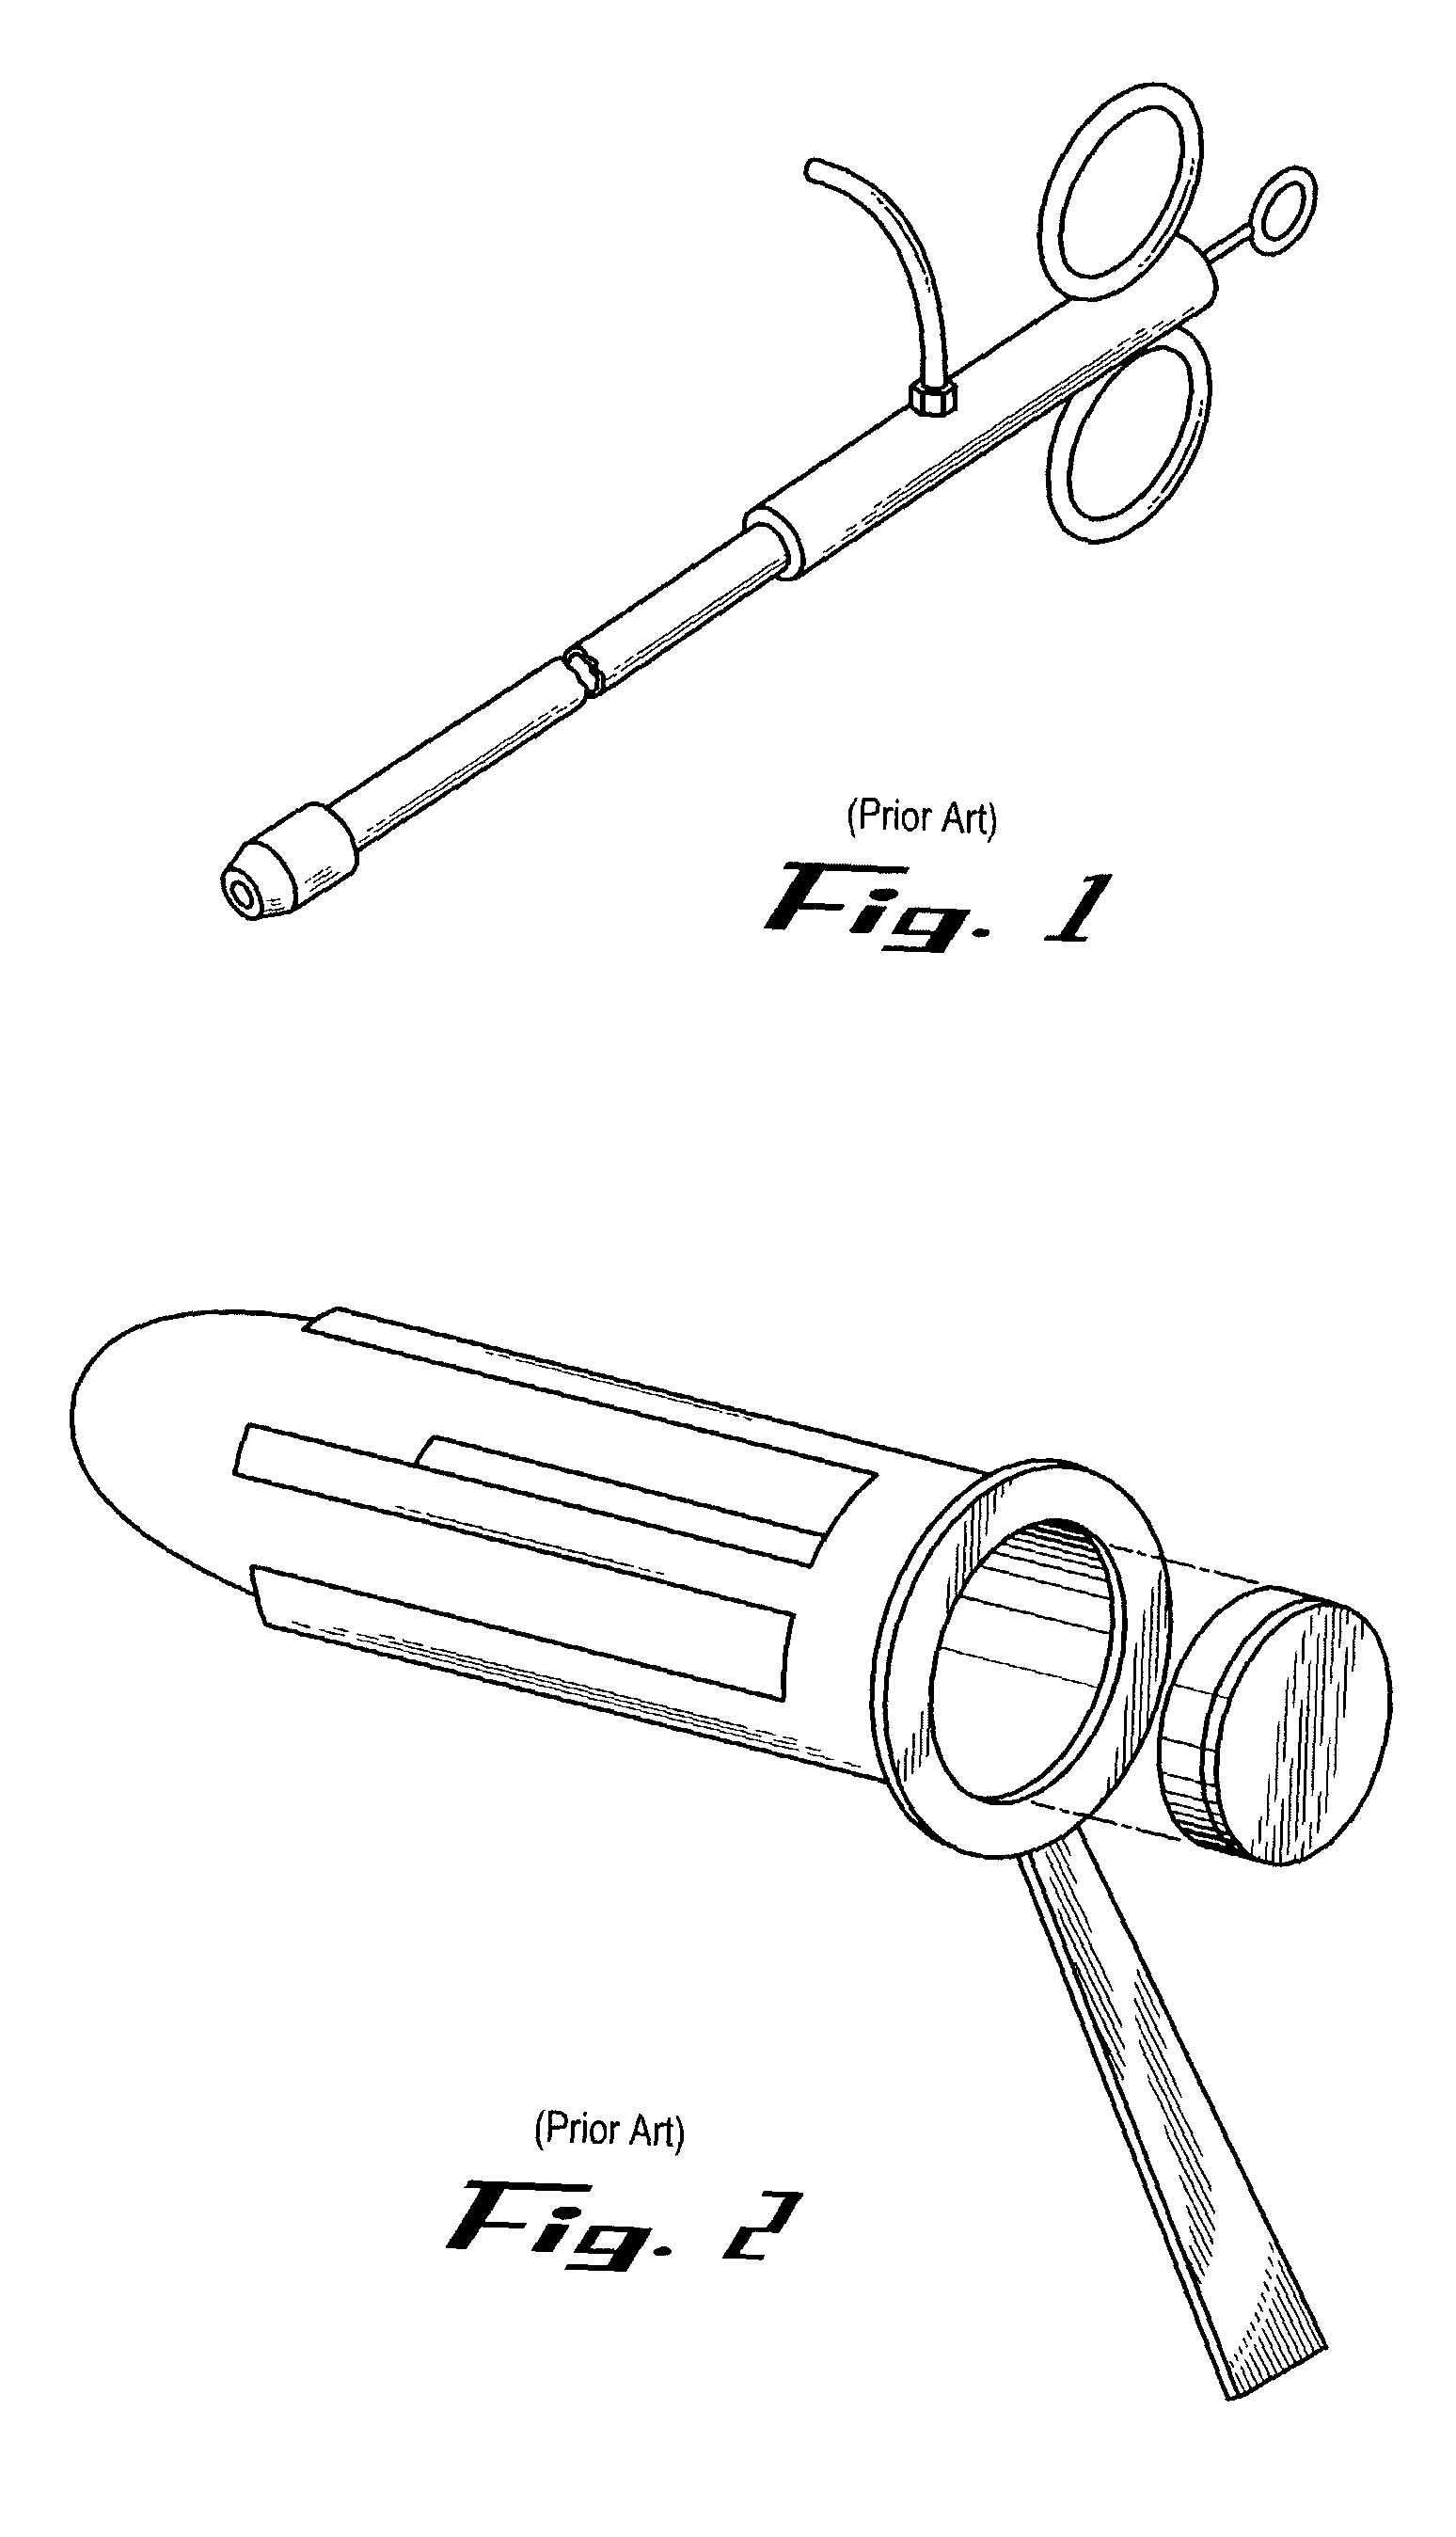 Multiple band ligator and anoscope system and method for using same